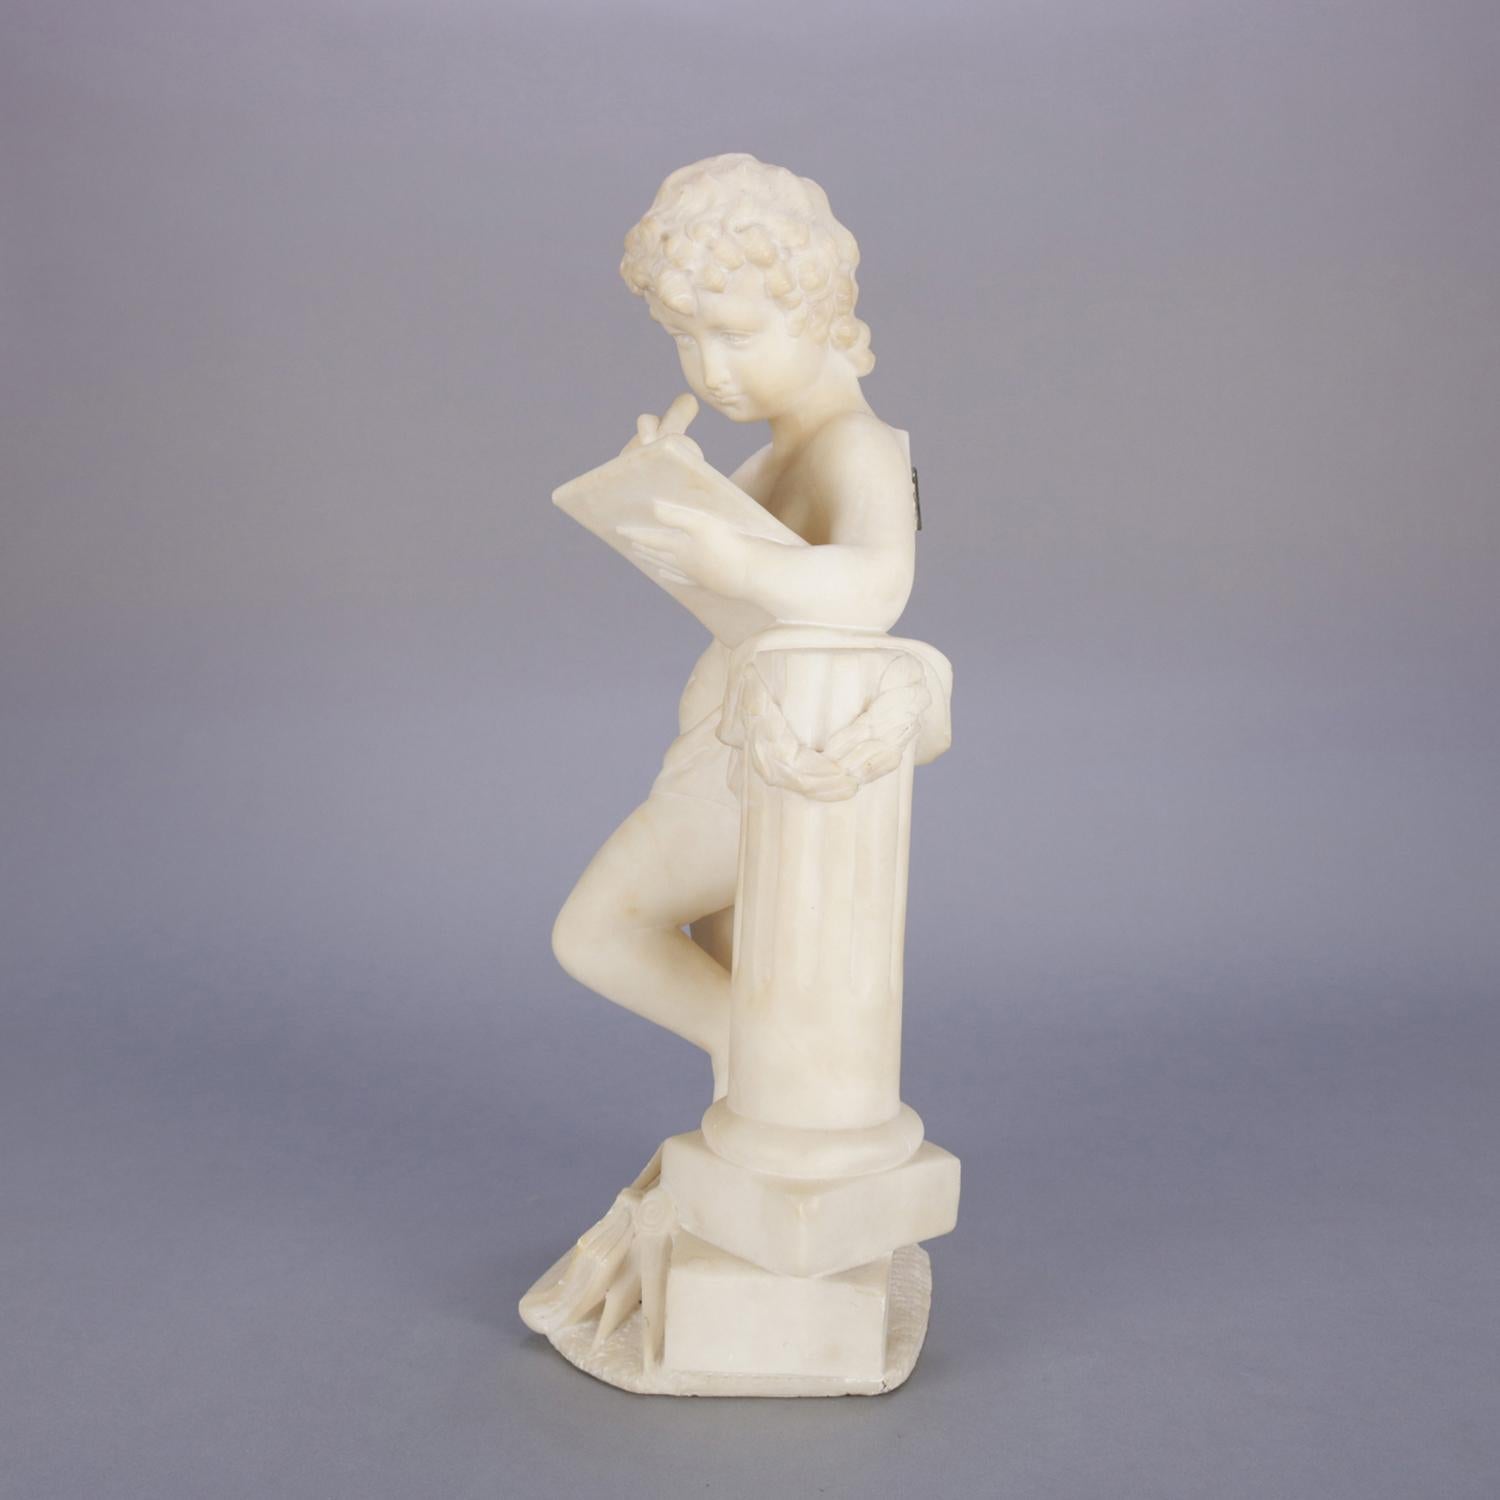 Hand-Carved Classical Italian Carved Alabaster Figural Sculpture of a Child Poet, circa 1890